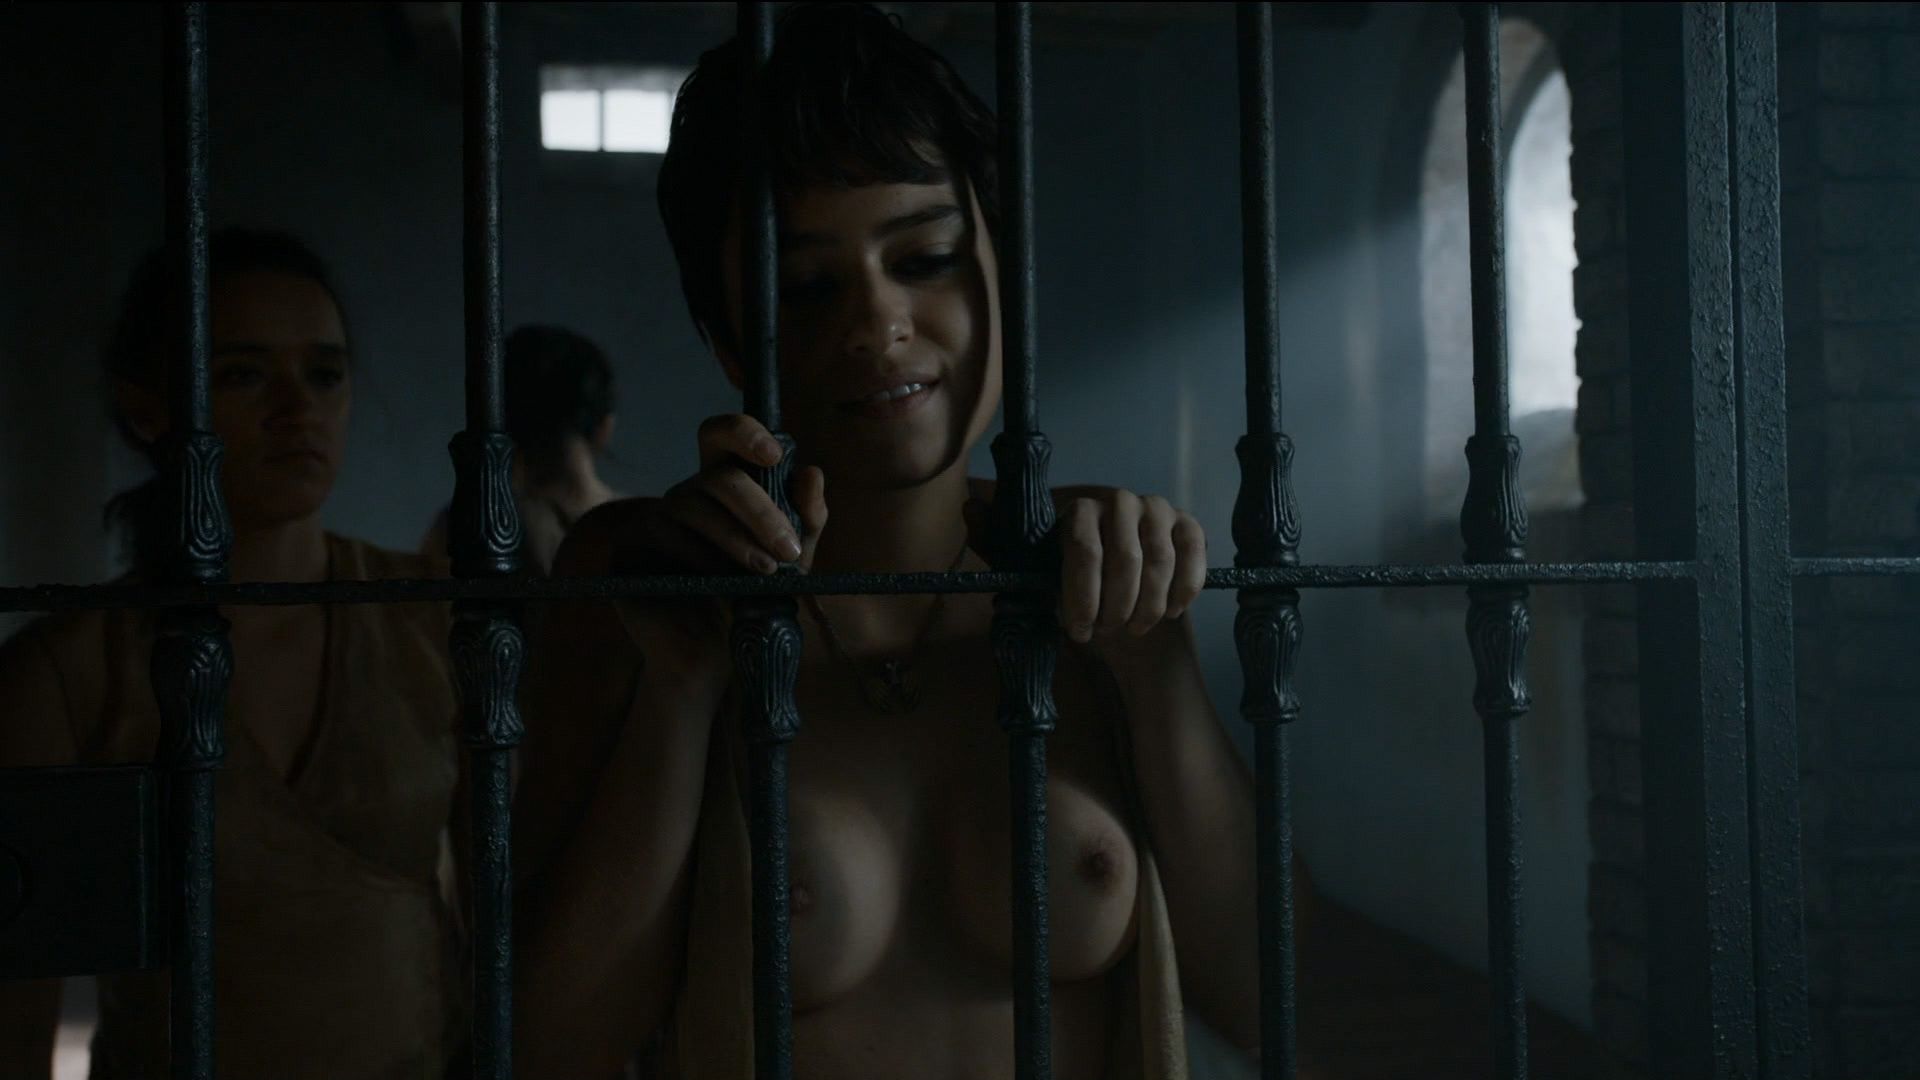 Rosabell laurenti sellers tits